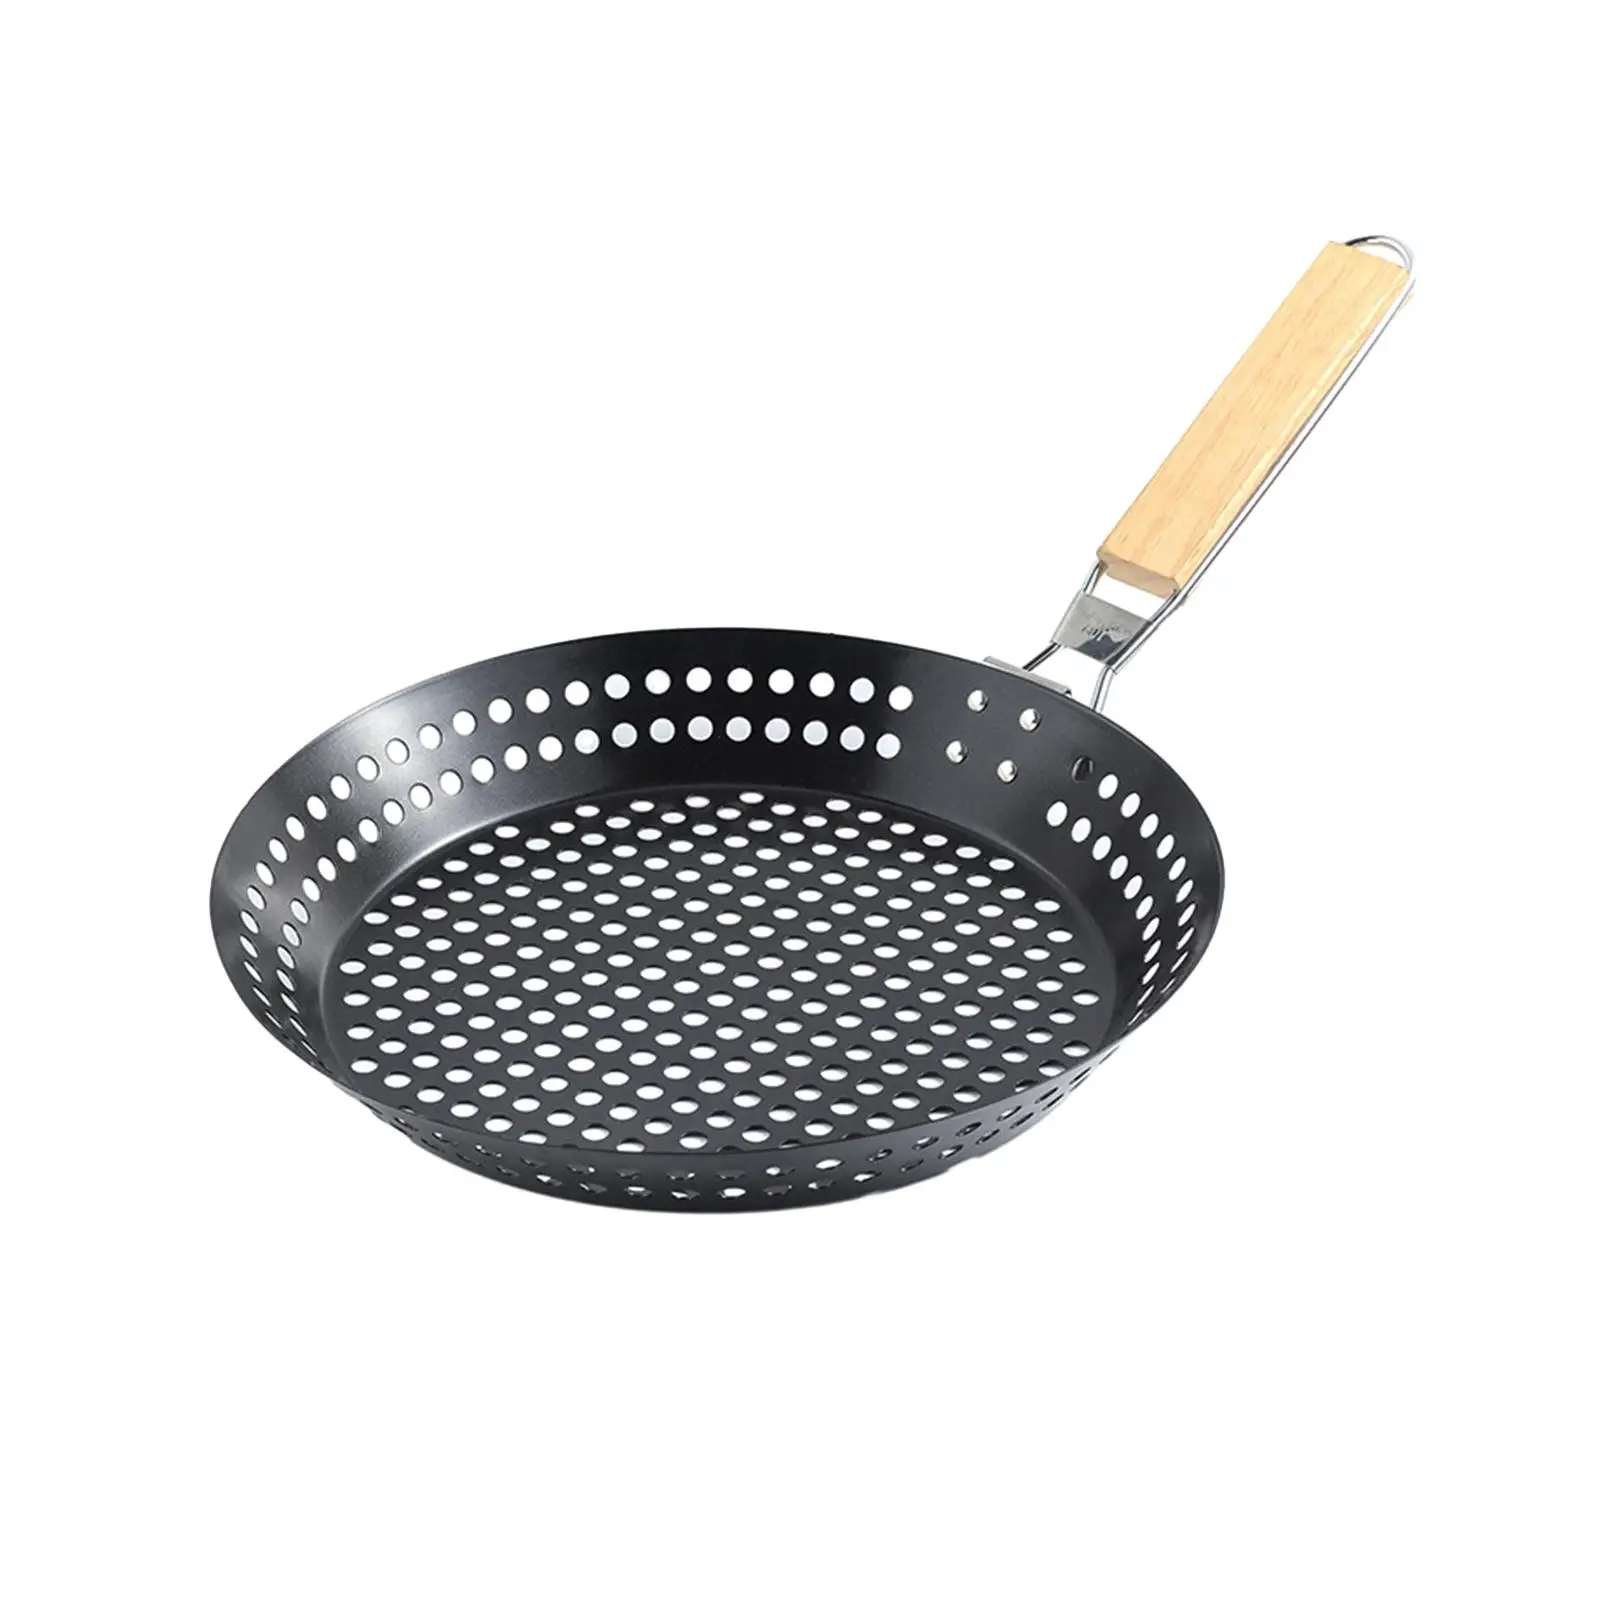 Bakeware Grill Pan Easily Clean Indoor or Outdoor Grilling Pan Frying Pan for Kitchen Cooking Indoor Outdoor Grilling Restaurant